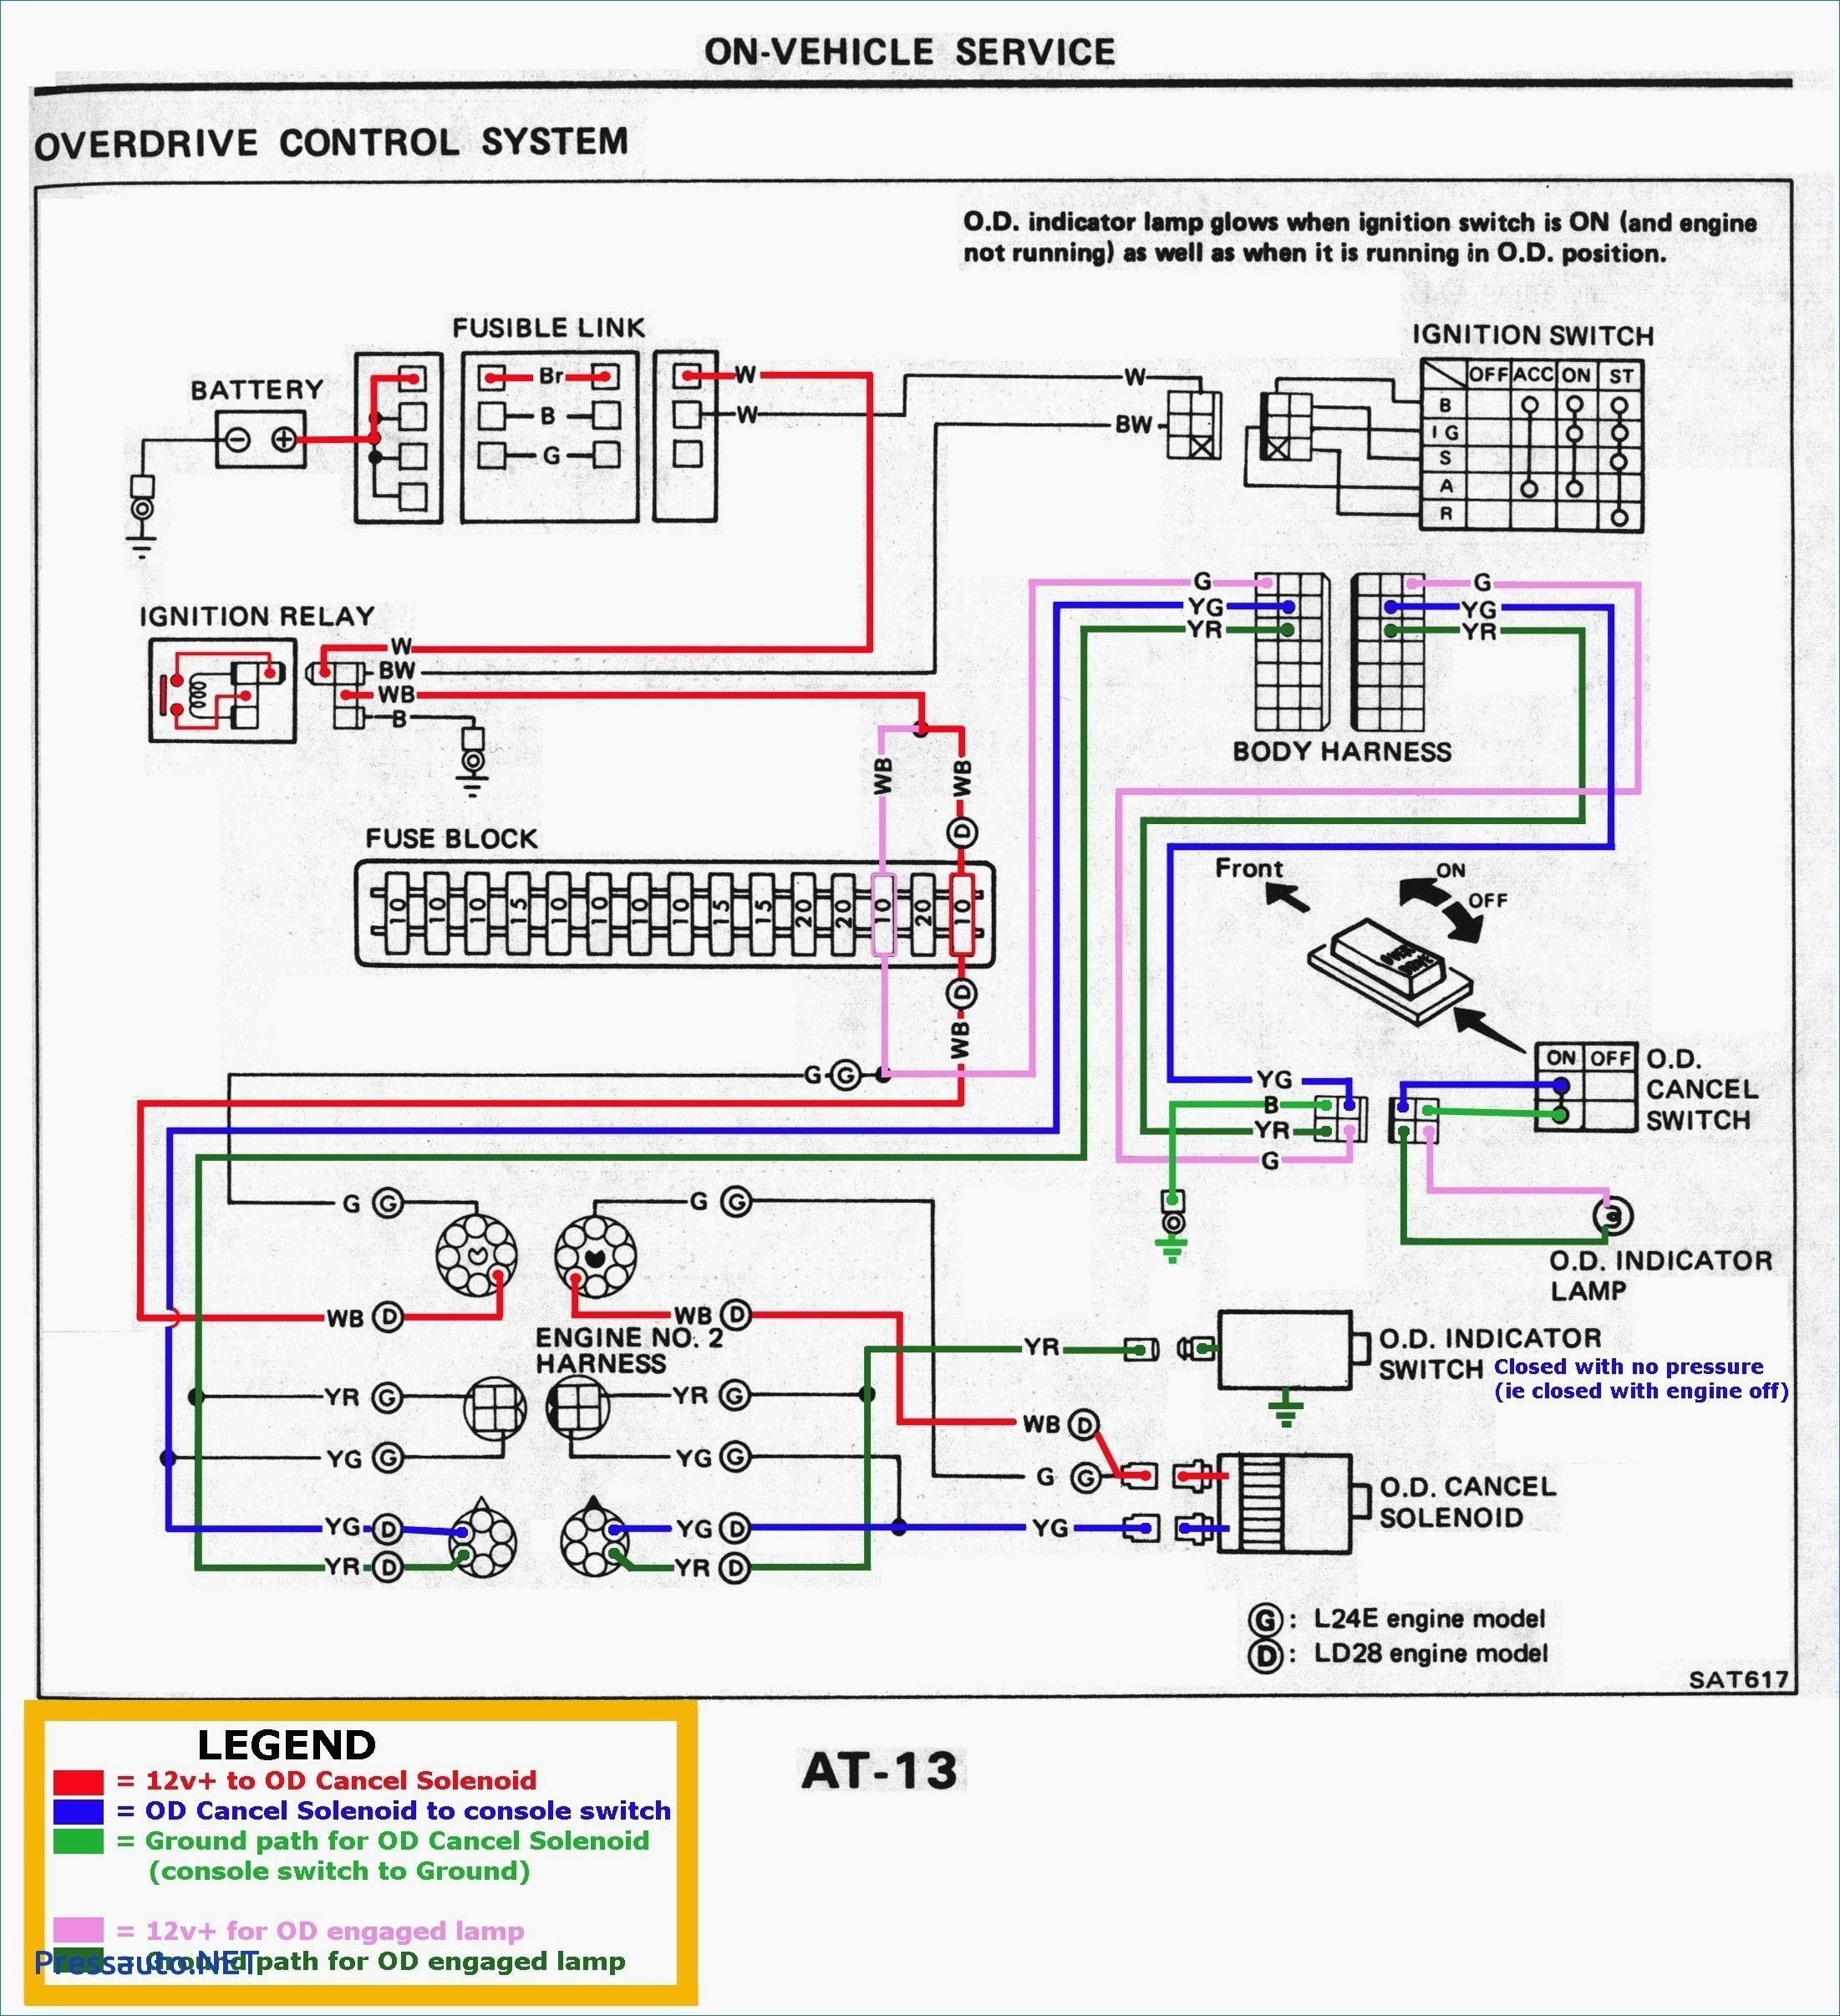 Forward and Reverse Switch Diagram New Bmw E46 M43 Wiring Diagram